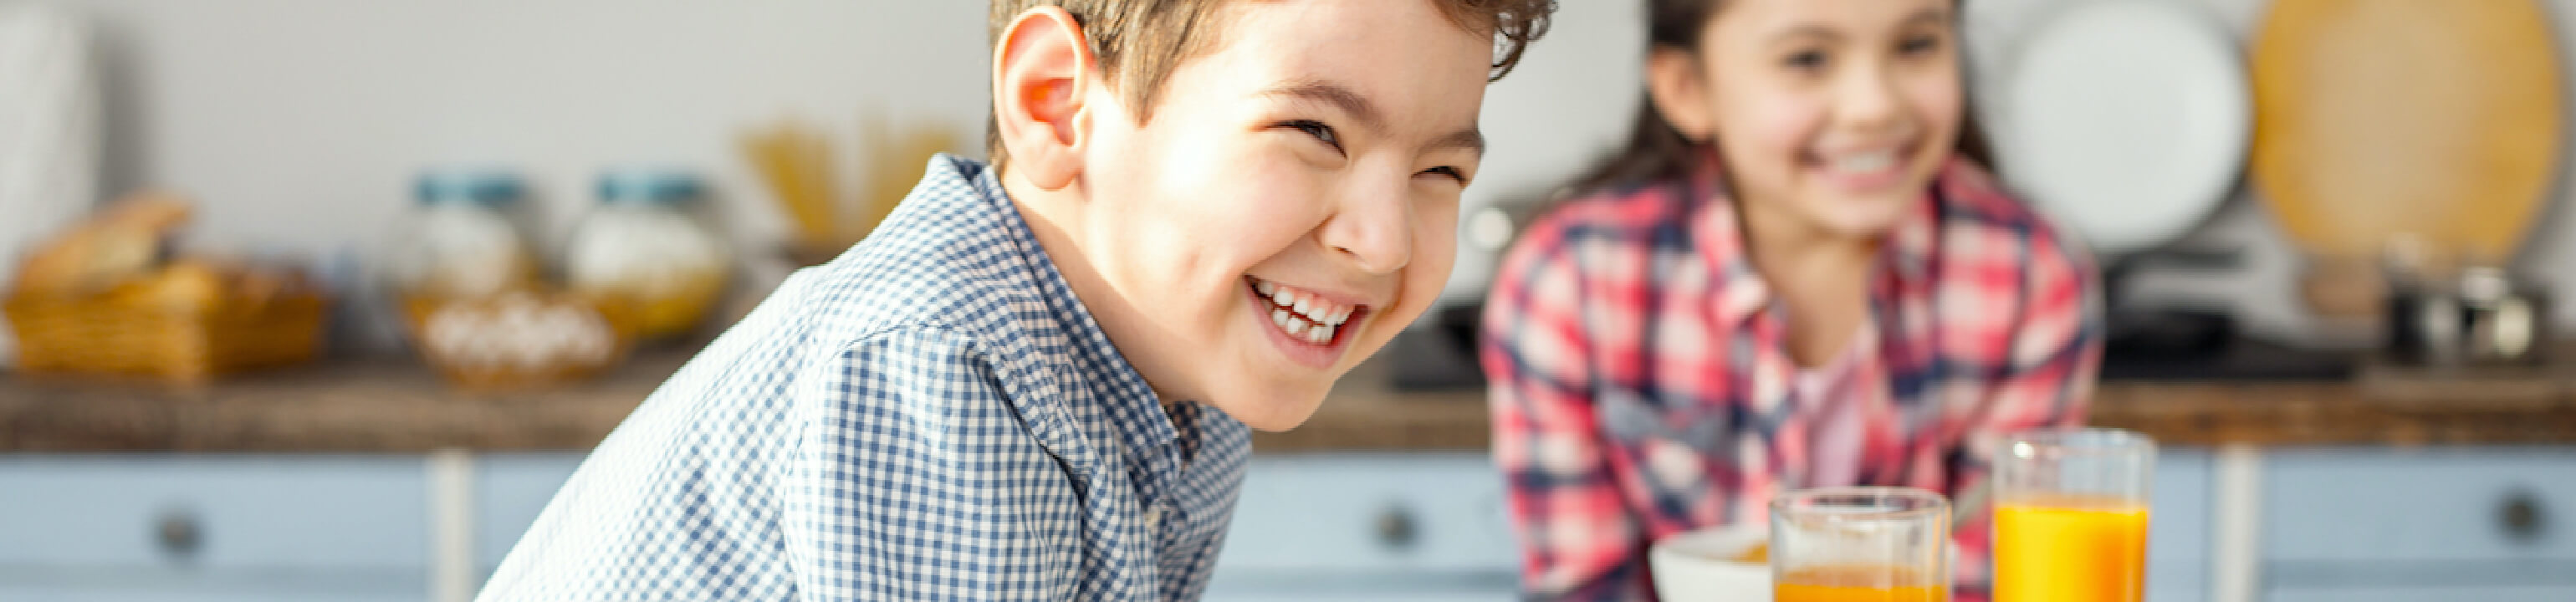 Young boy smiling wide at kitchen table with young girl smiling in background.